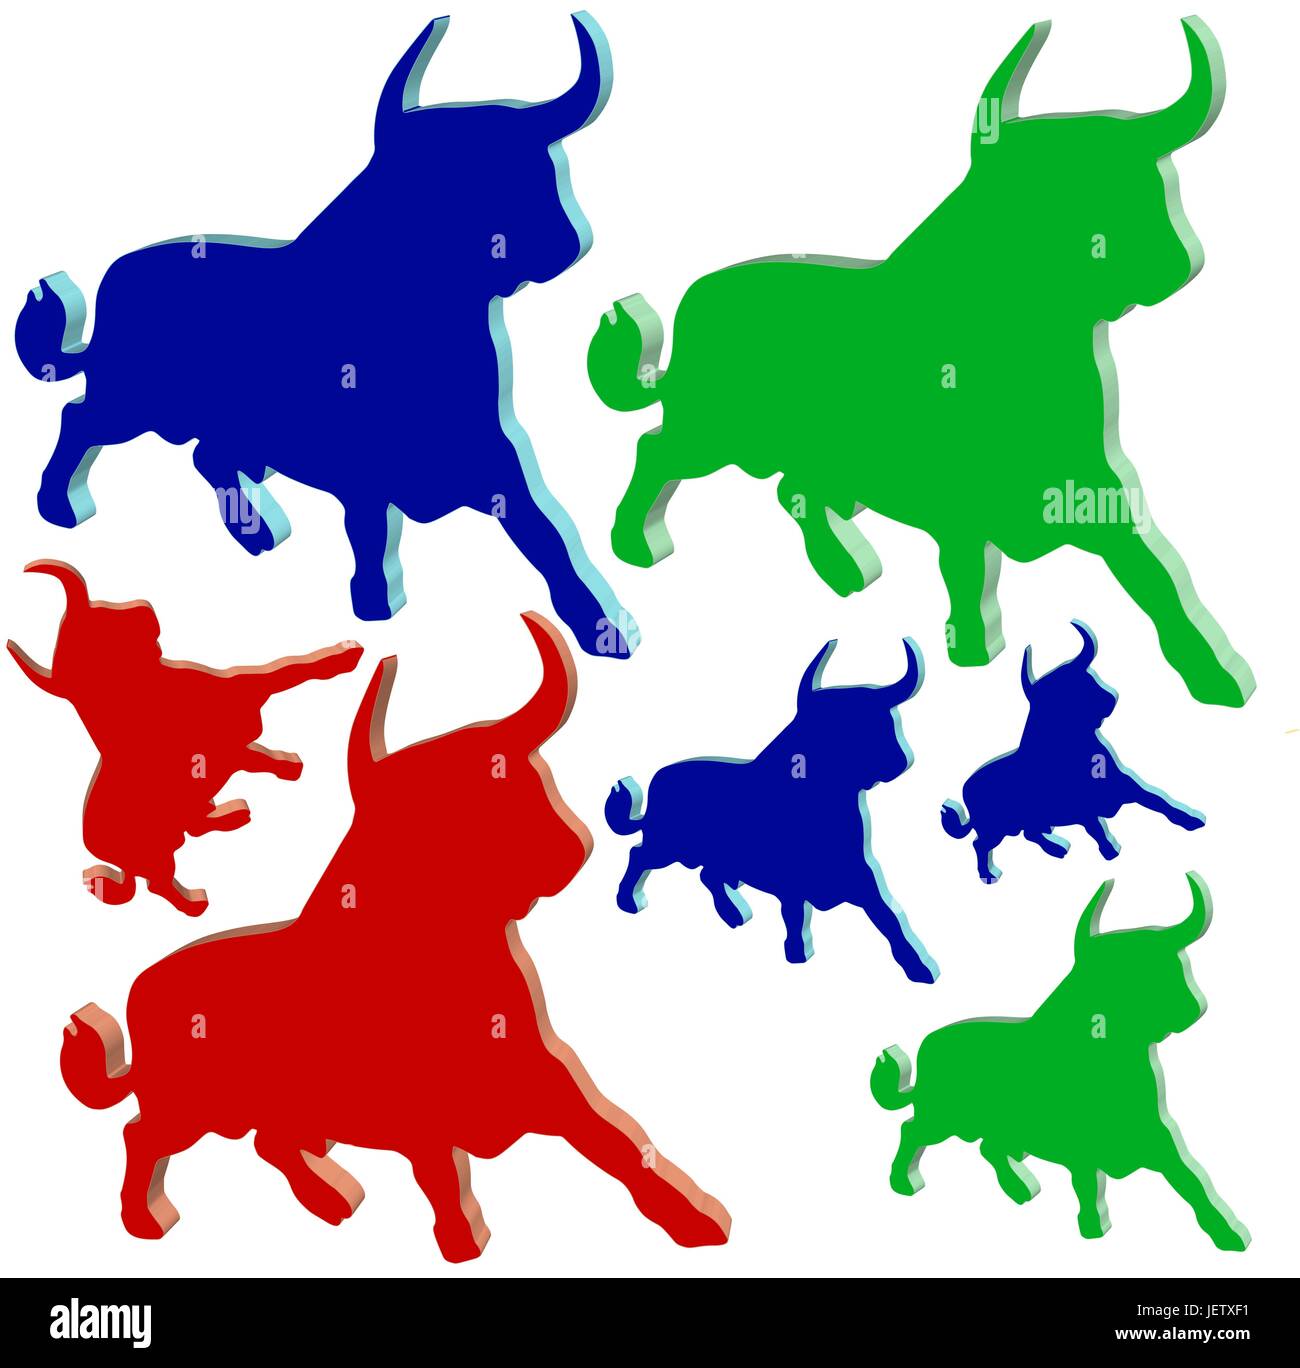 taurus in different colors - indemnified vector Stock Vector